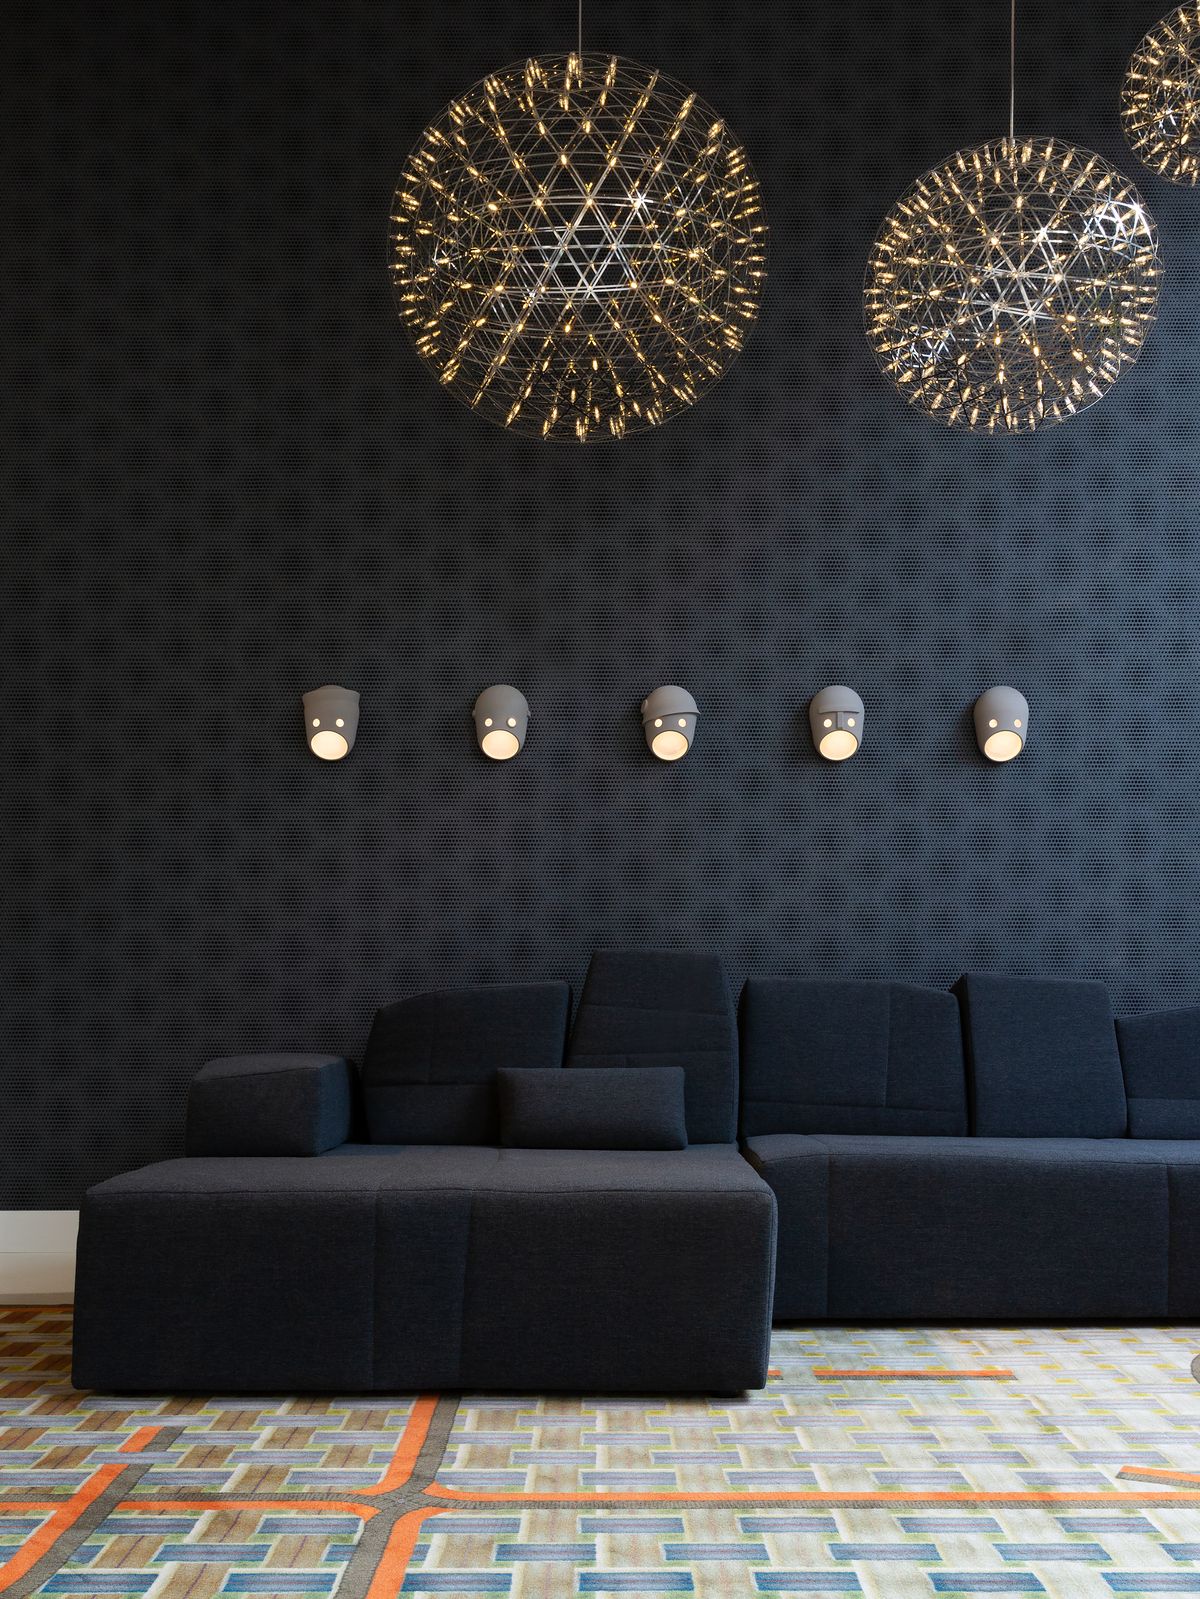 Wall lamp (Sconce) PARTY LAMP by Moooi